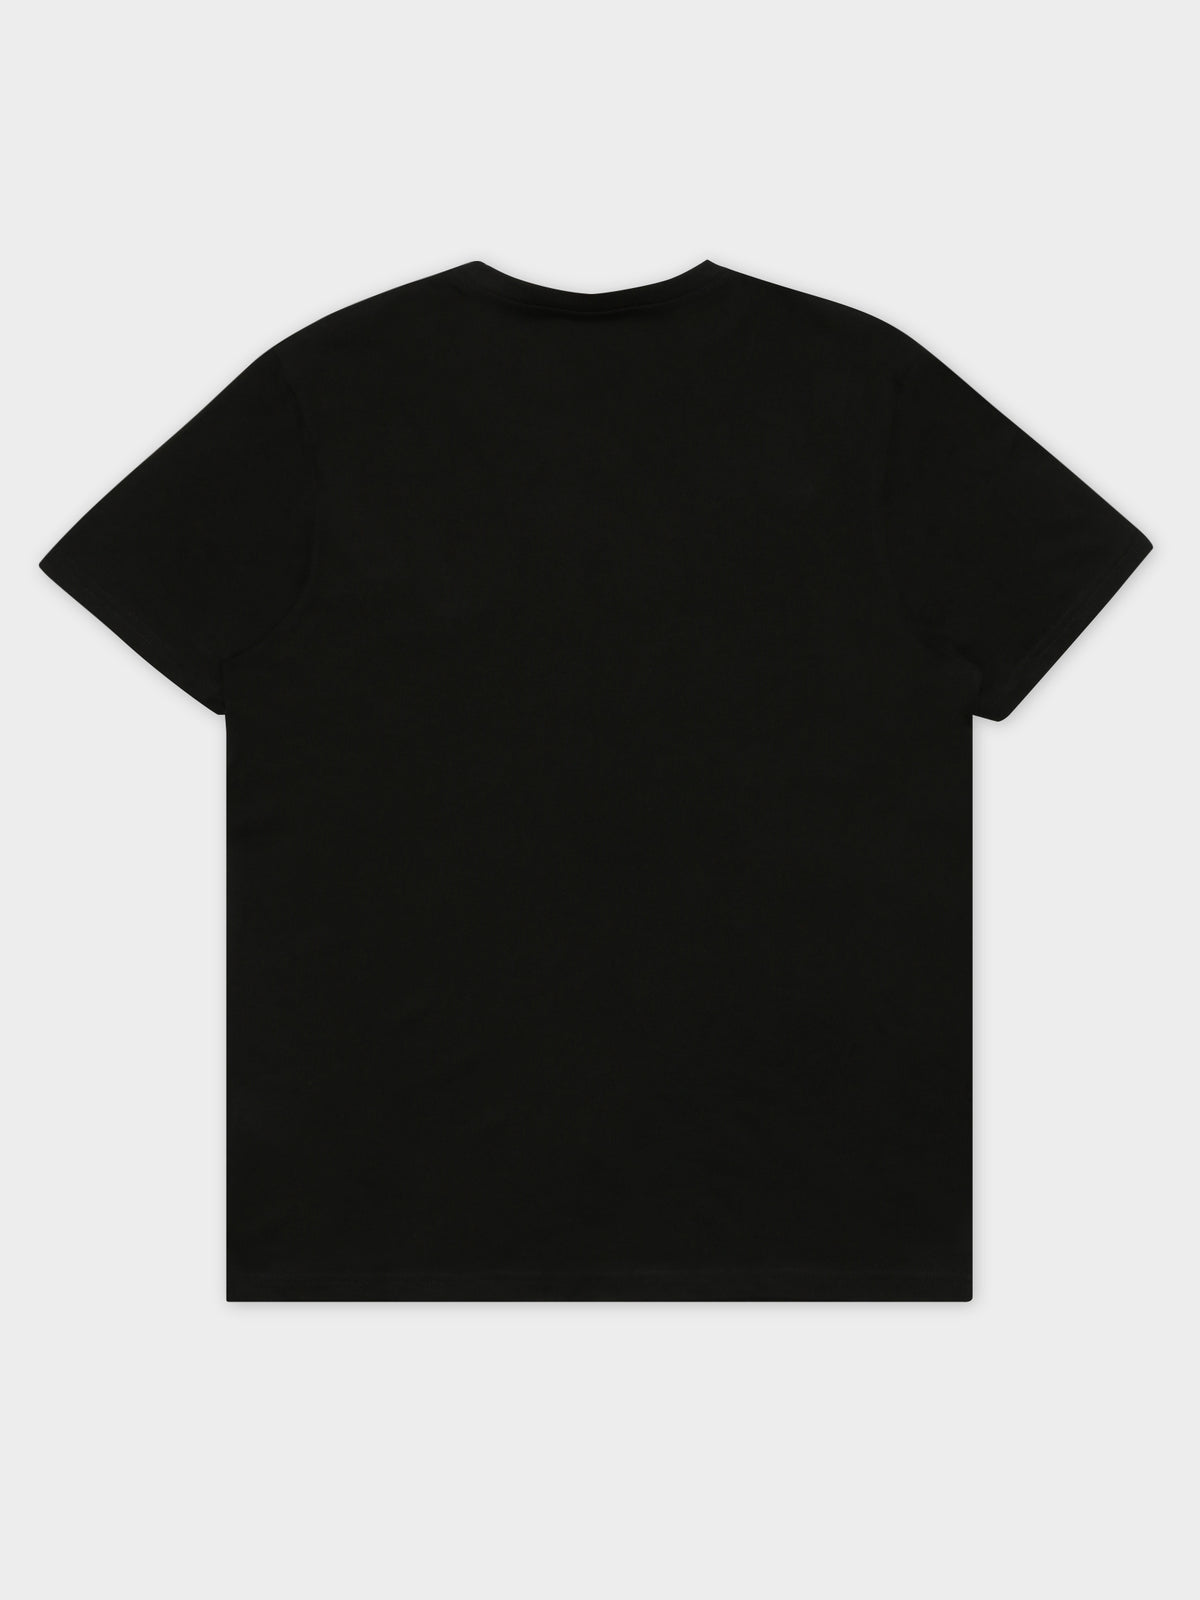 Authentic Starot T-Shirt in Black